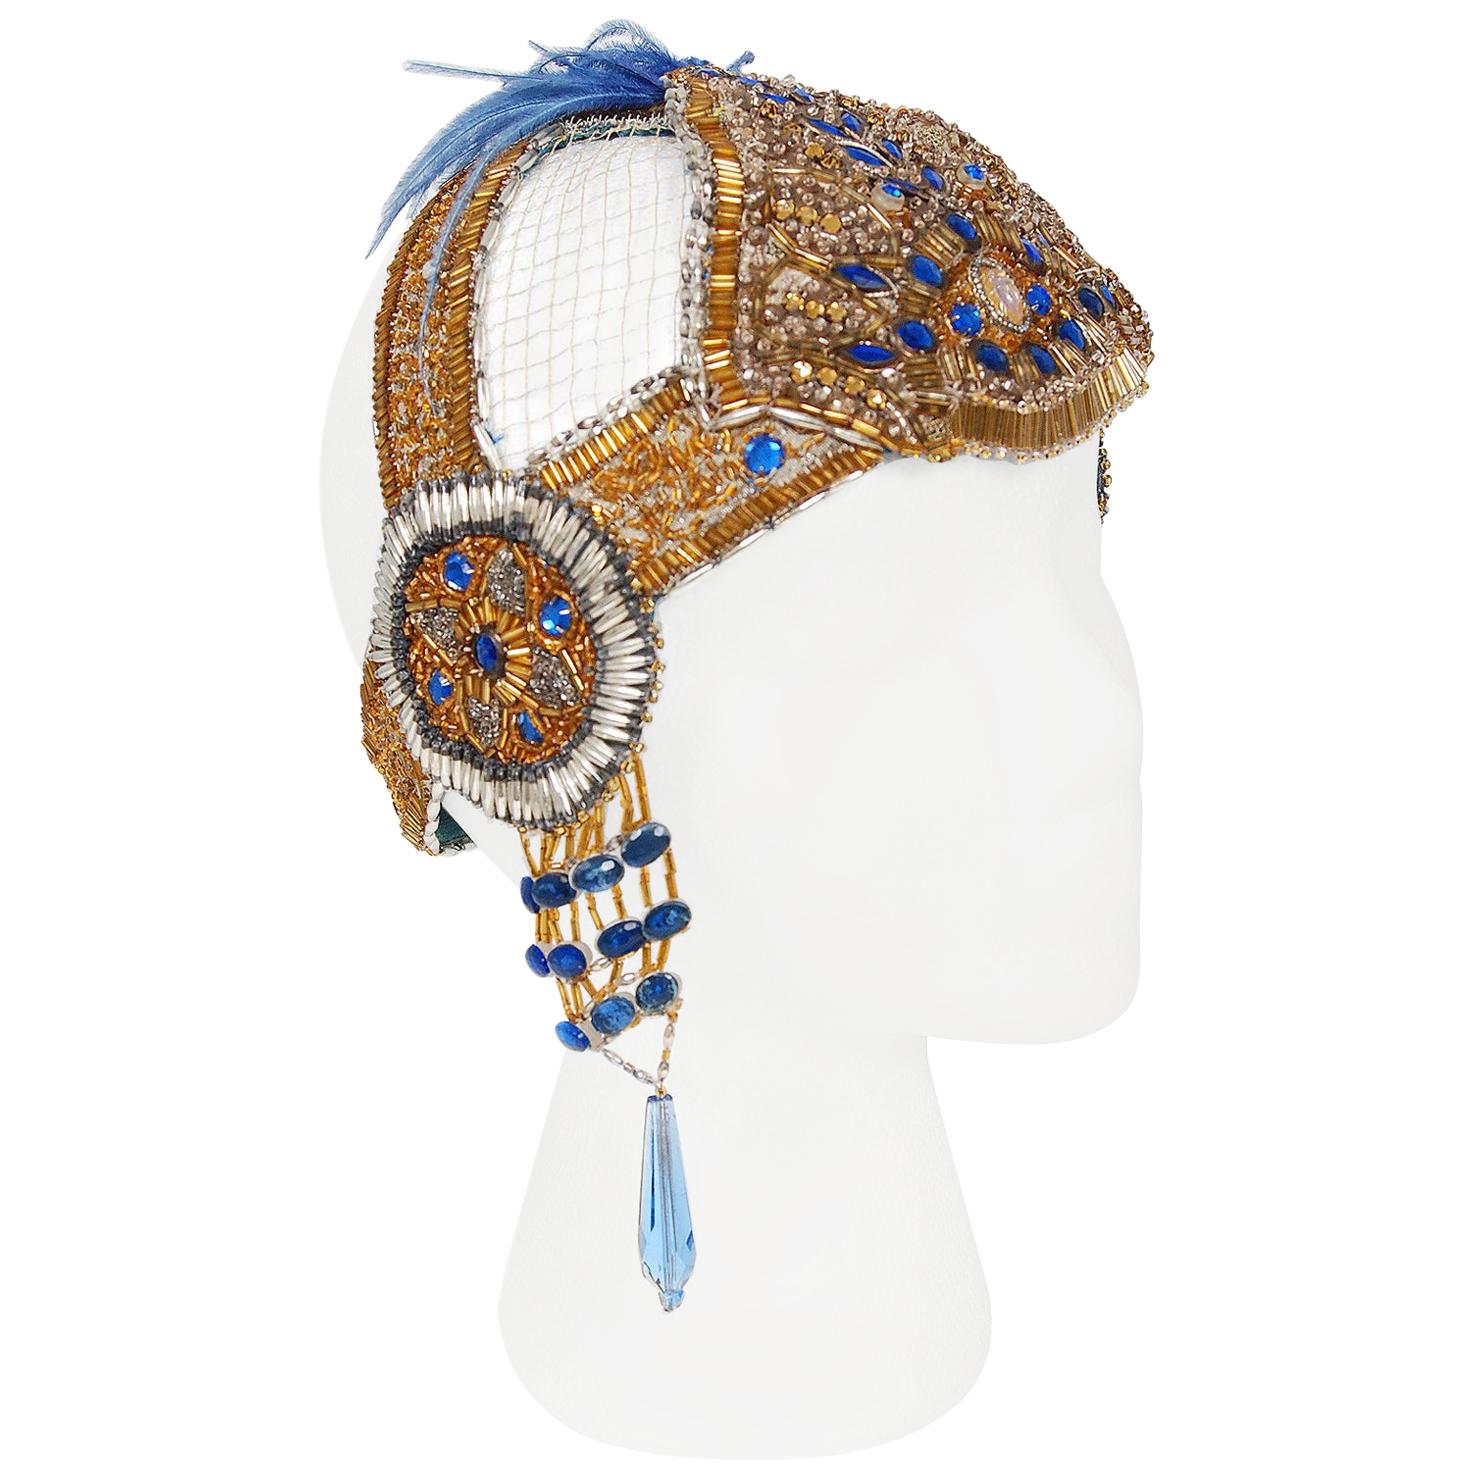 Vintage 1920's French Couture Gold Beaded Blue Jeweled Flapper Crown Headpiece 